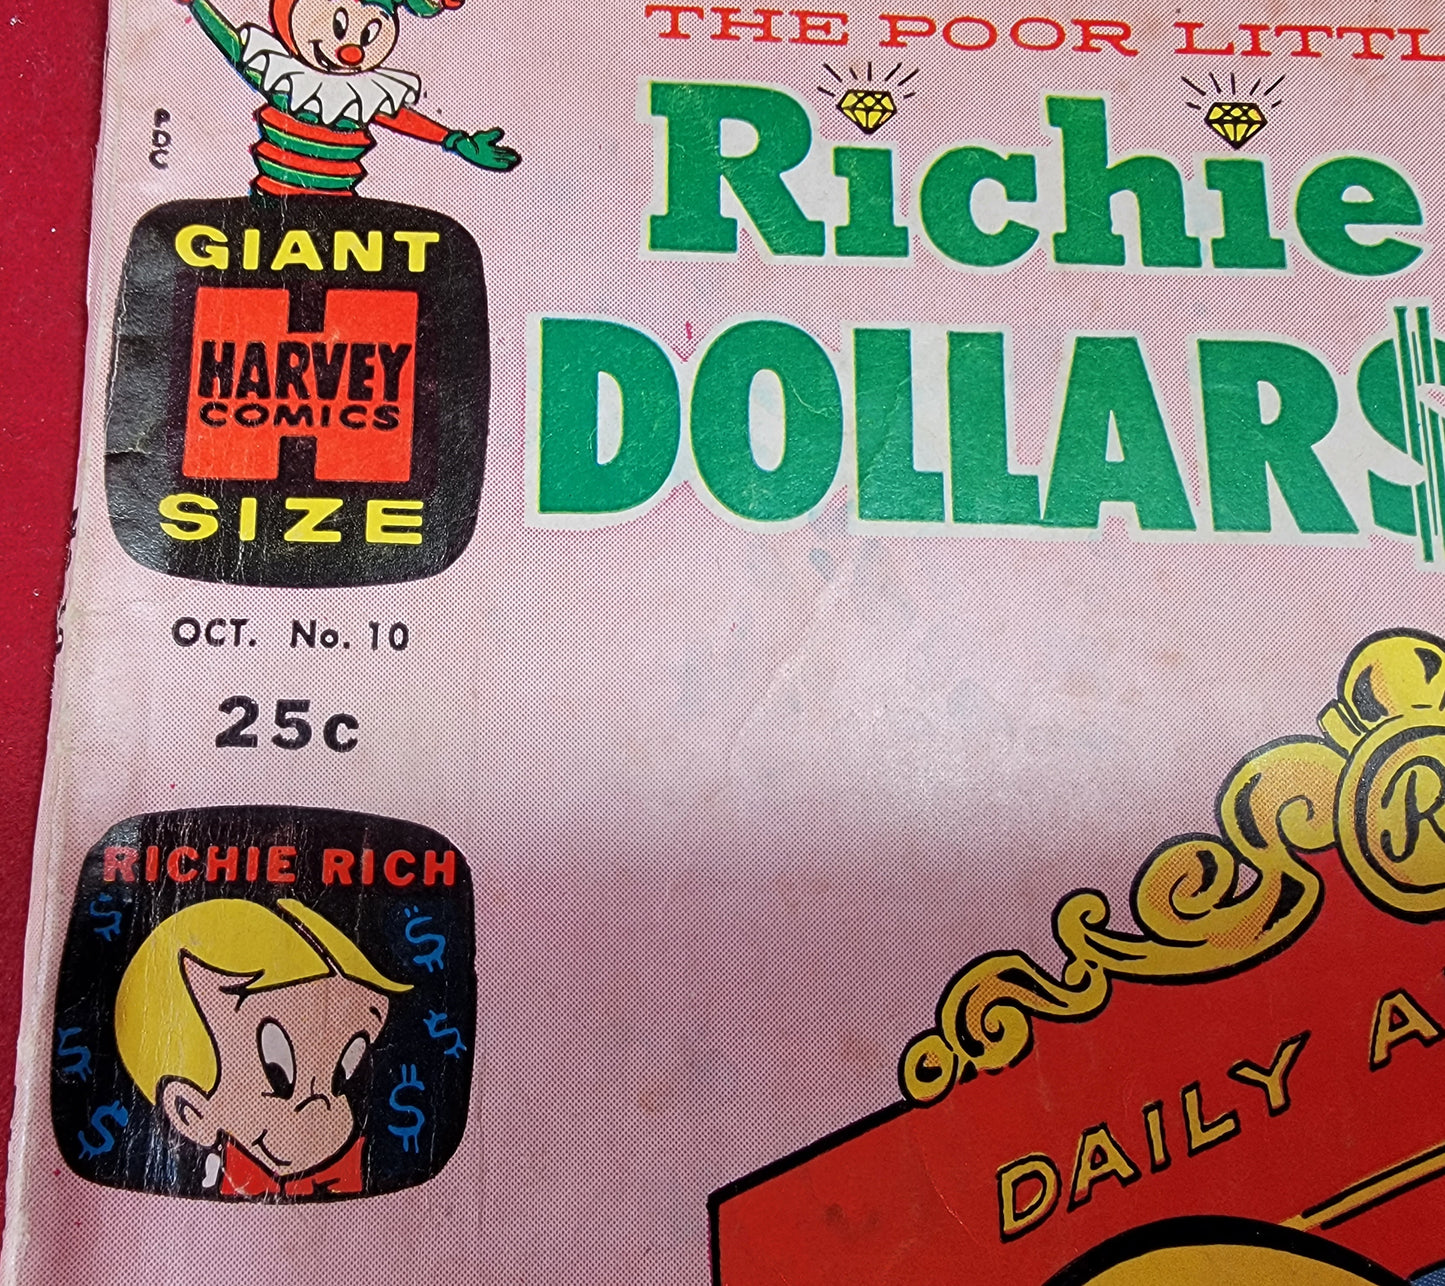 Richie rich dollar$ and cents # 10 comic (1965)